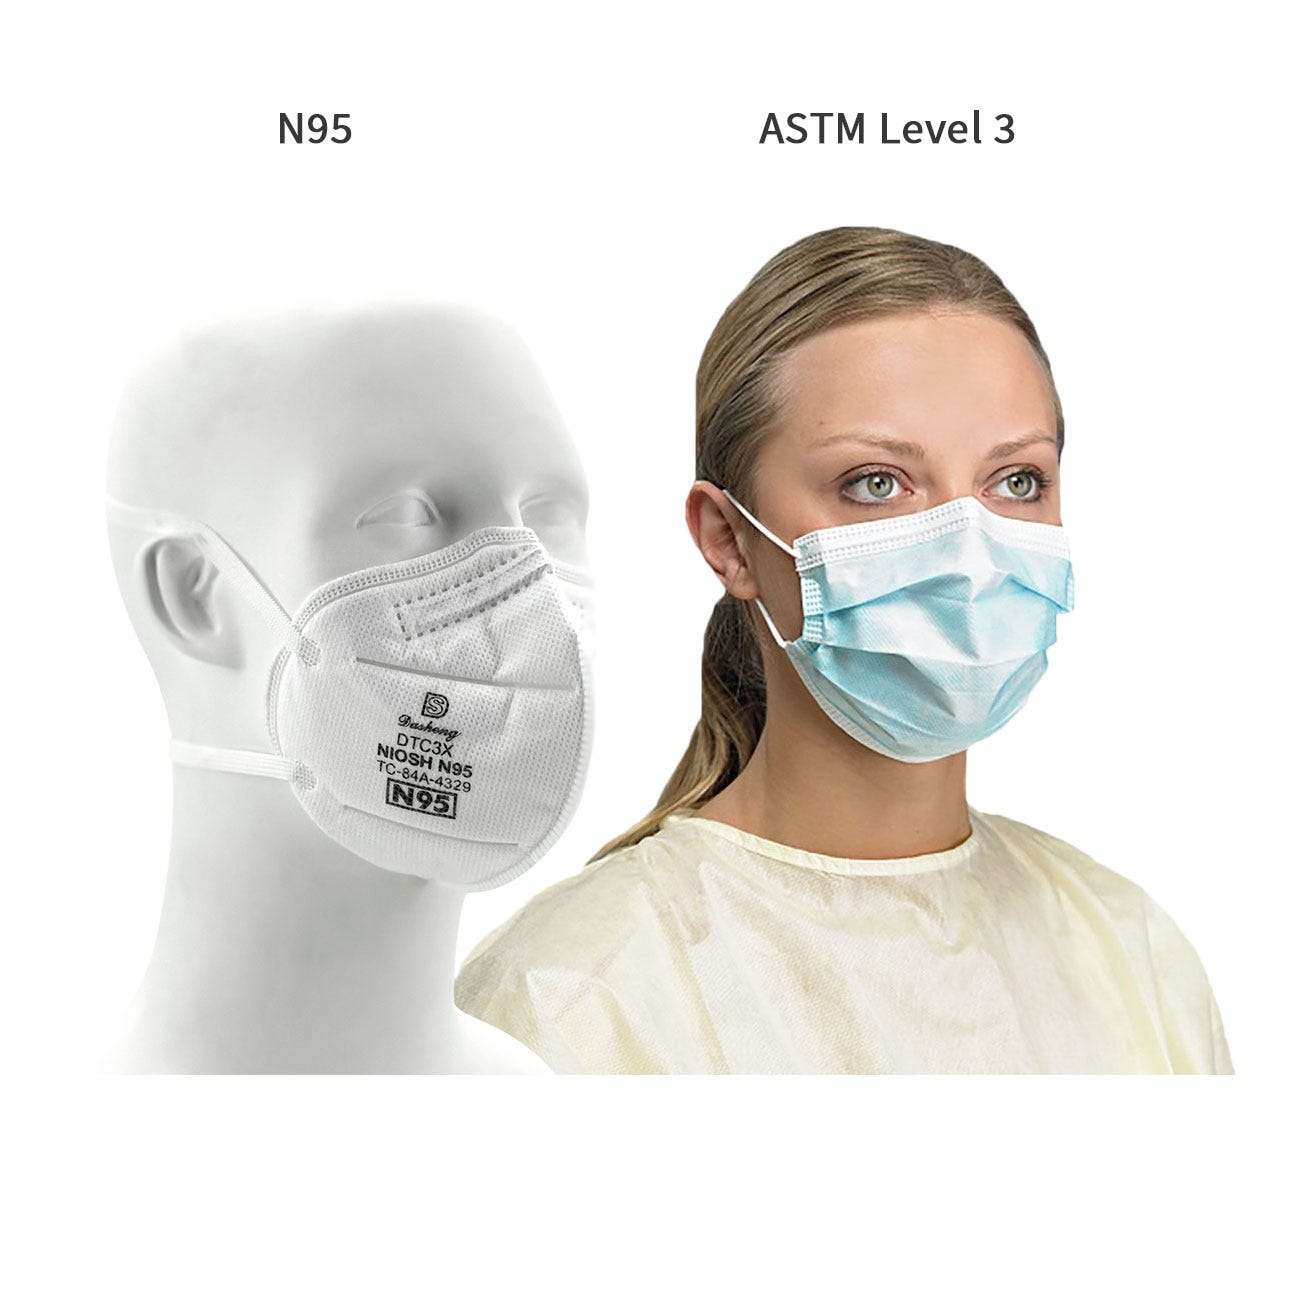 SAS Level 3 and N95 Mask Bundle - 10 boxes of PG41273 and 1 box of DTC3X